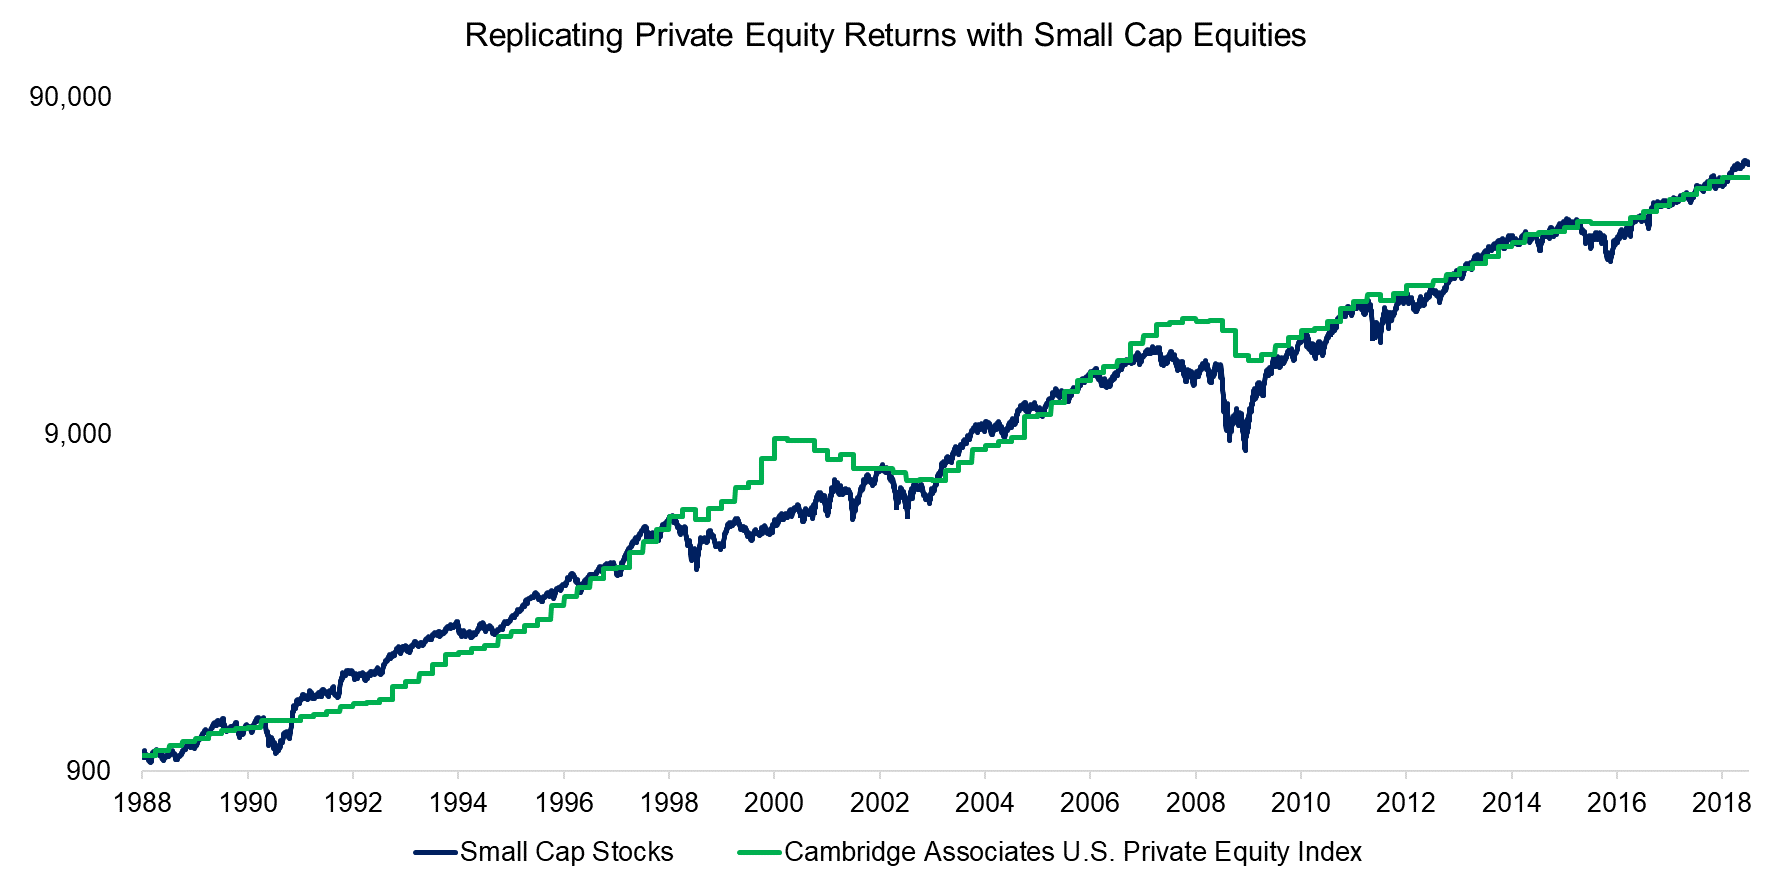 Replicating Private Equity Returns with Small Cap Equities